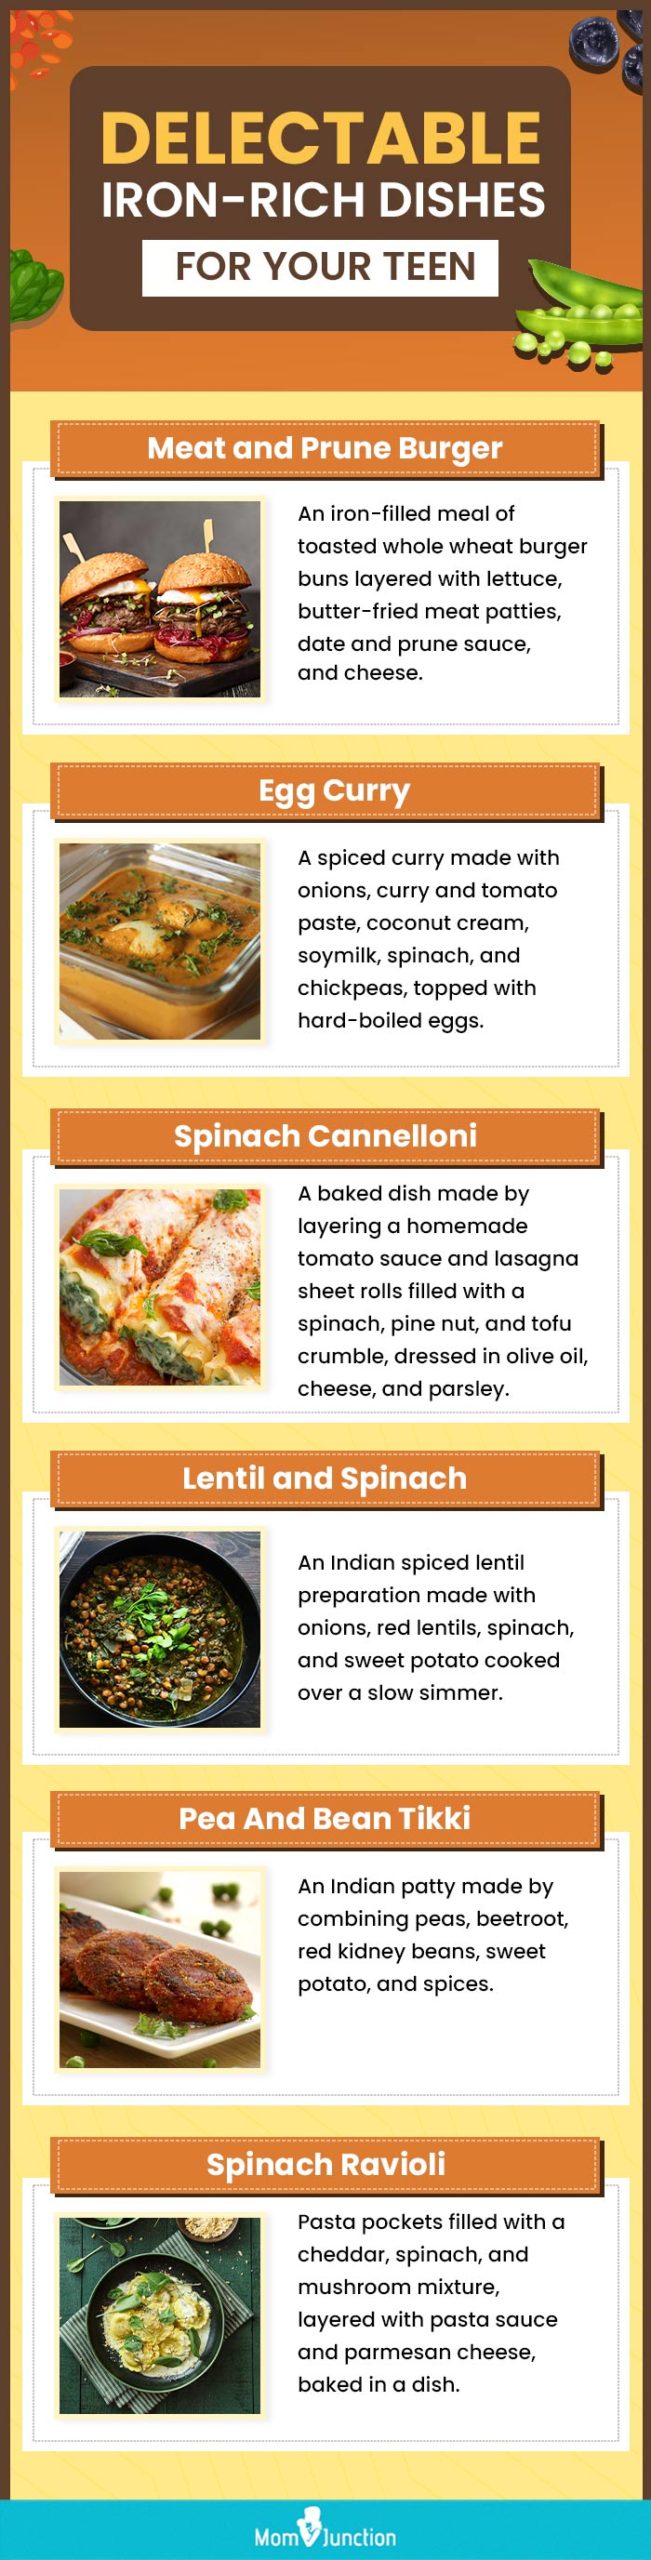 delectable iron rich dishes for your teen (infographic)